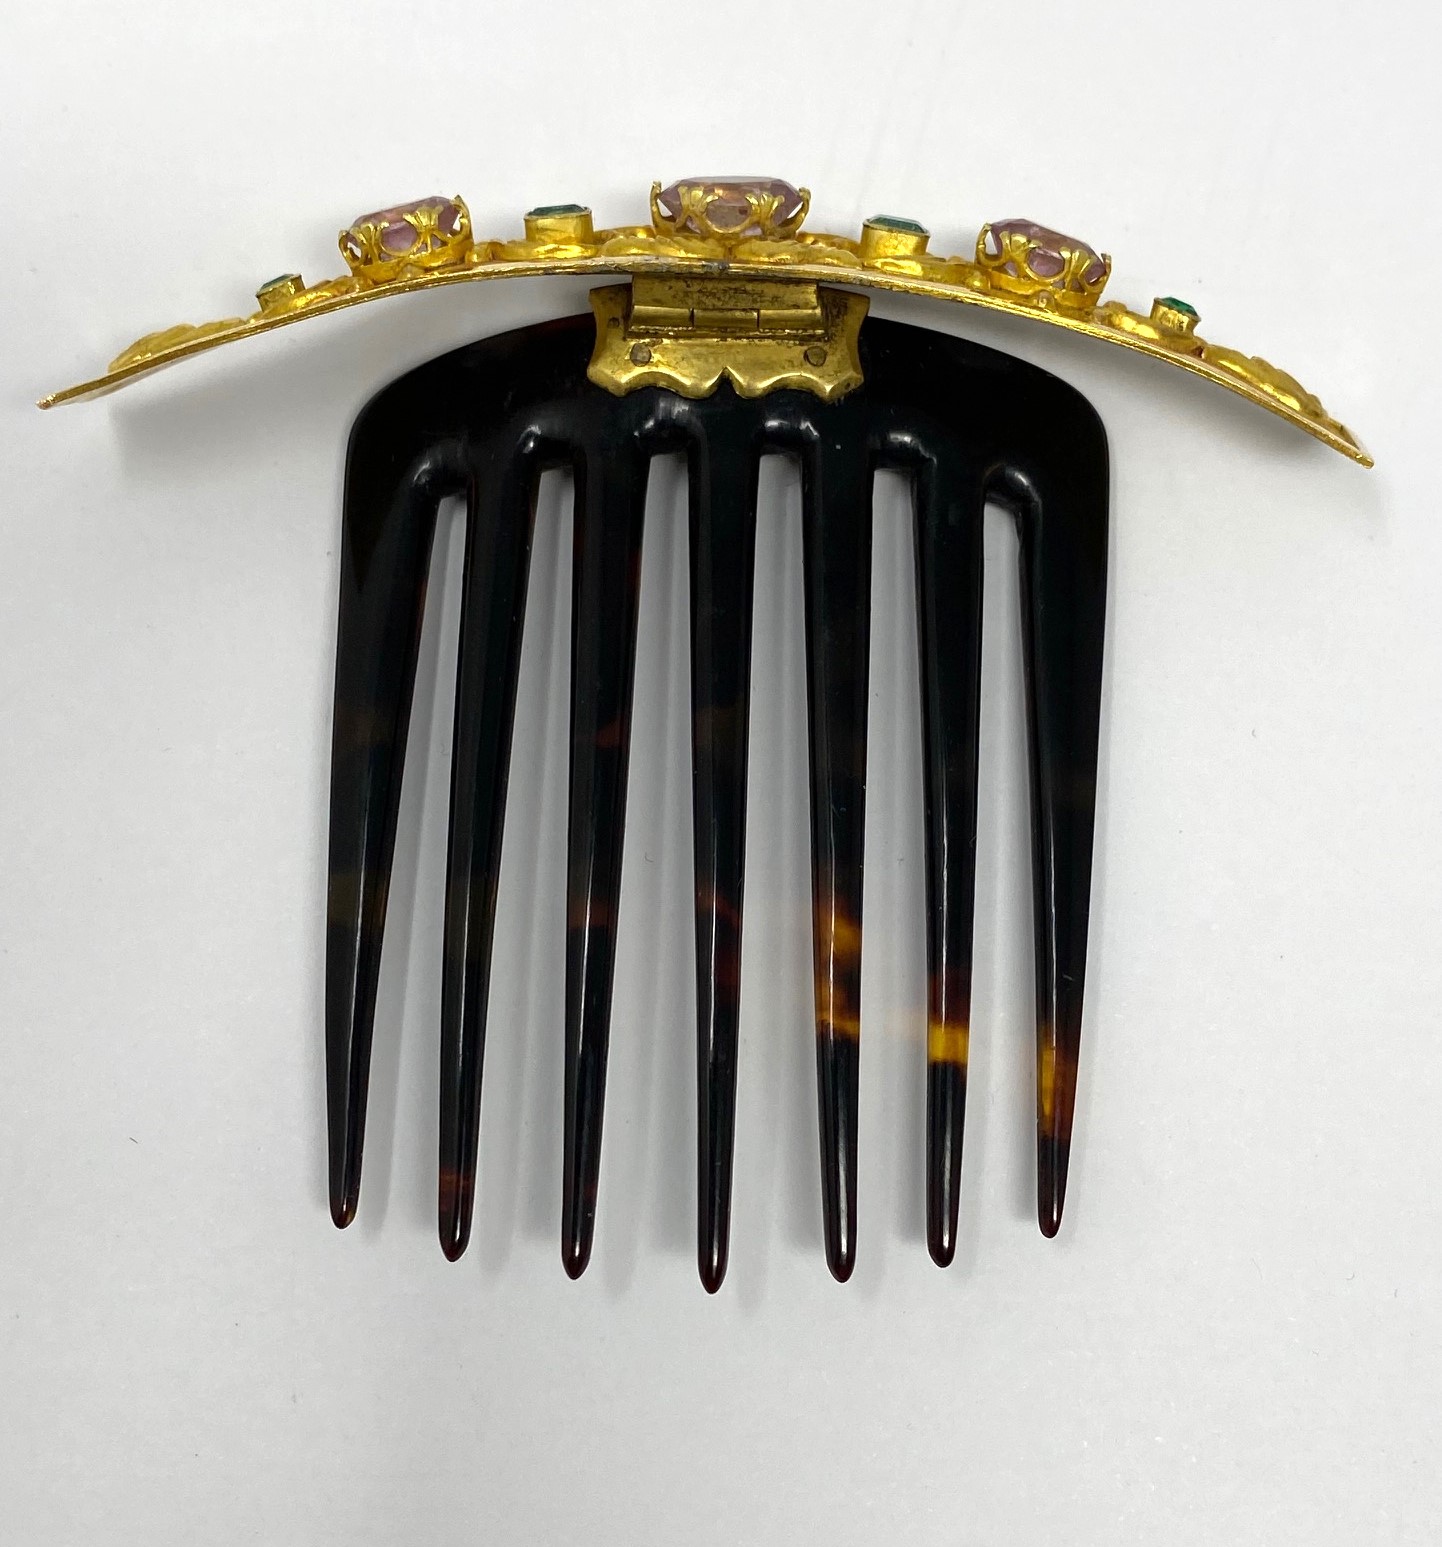 ˜ GOLD, TOPAZ, EMERALD AND TORTOISESHELL HAIR COMB, 1830s - Image 5 of 7